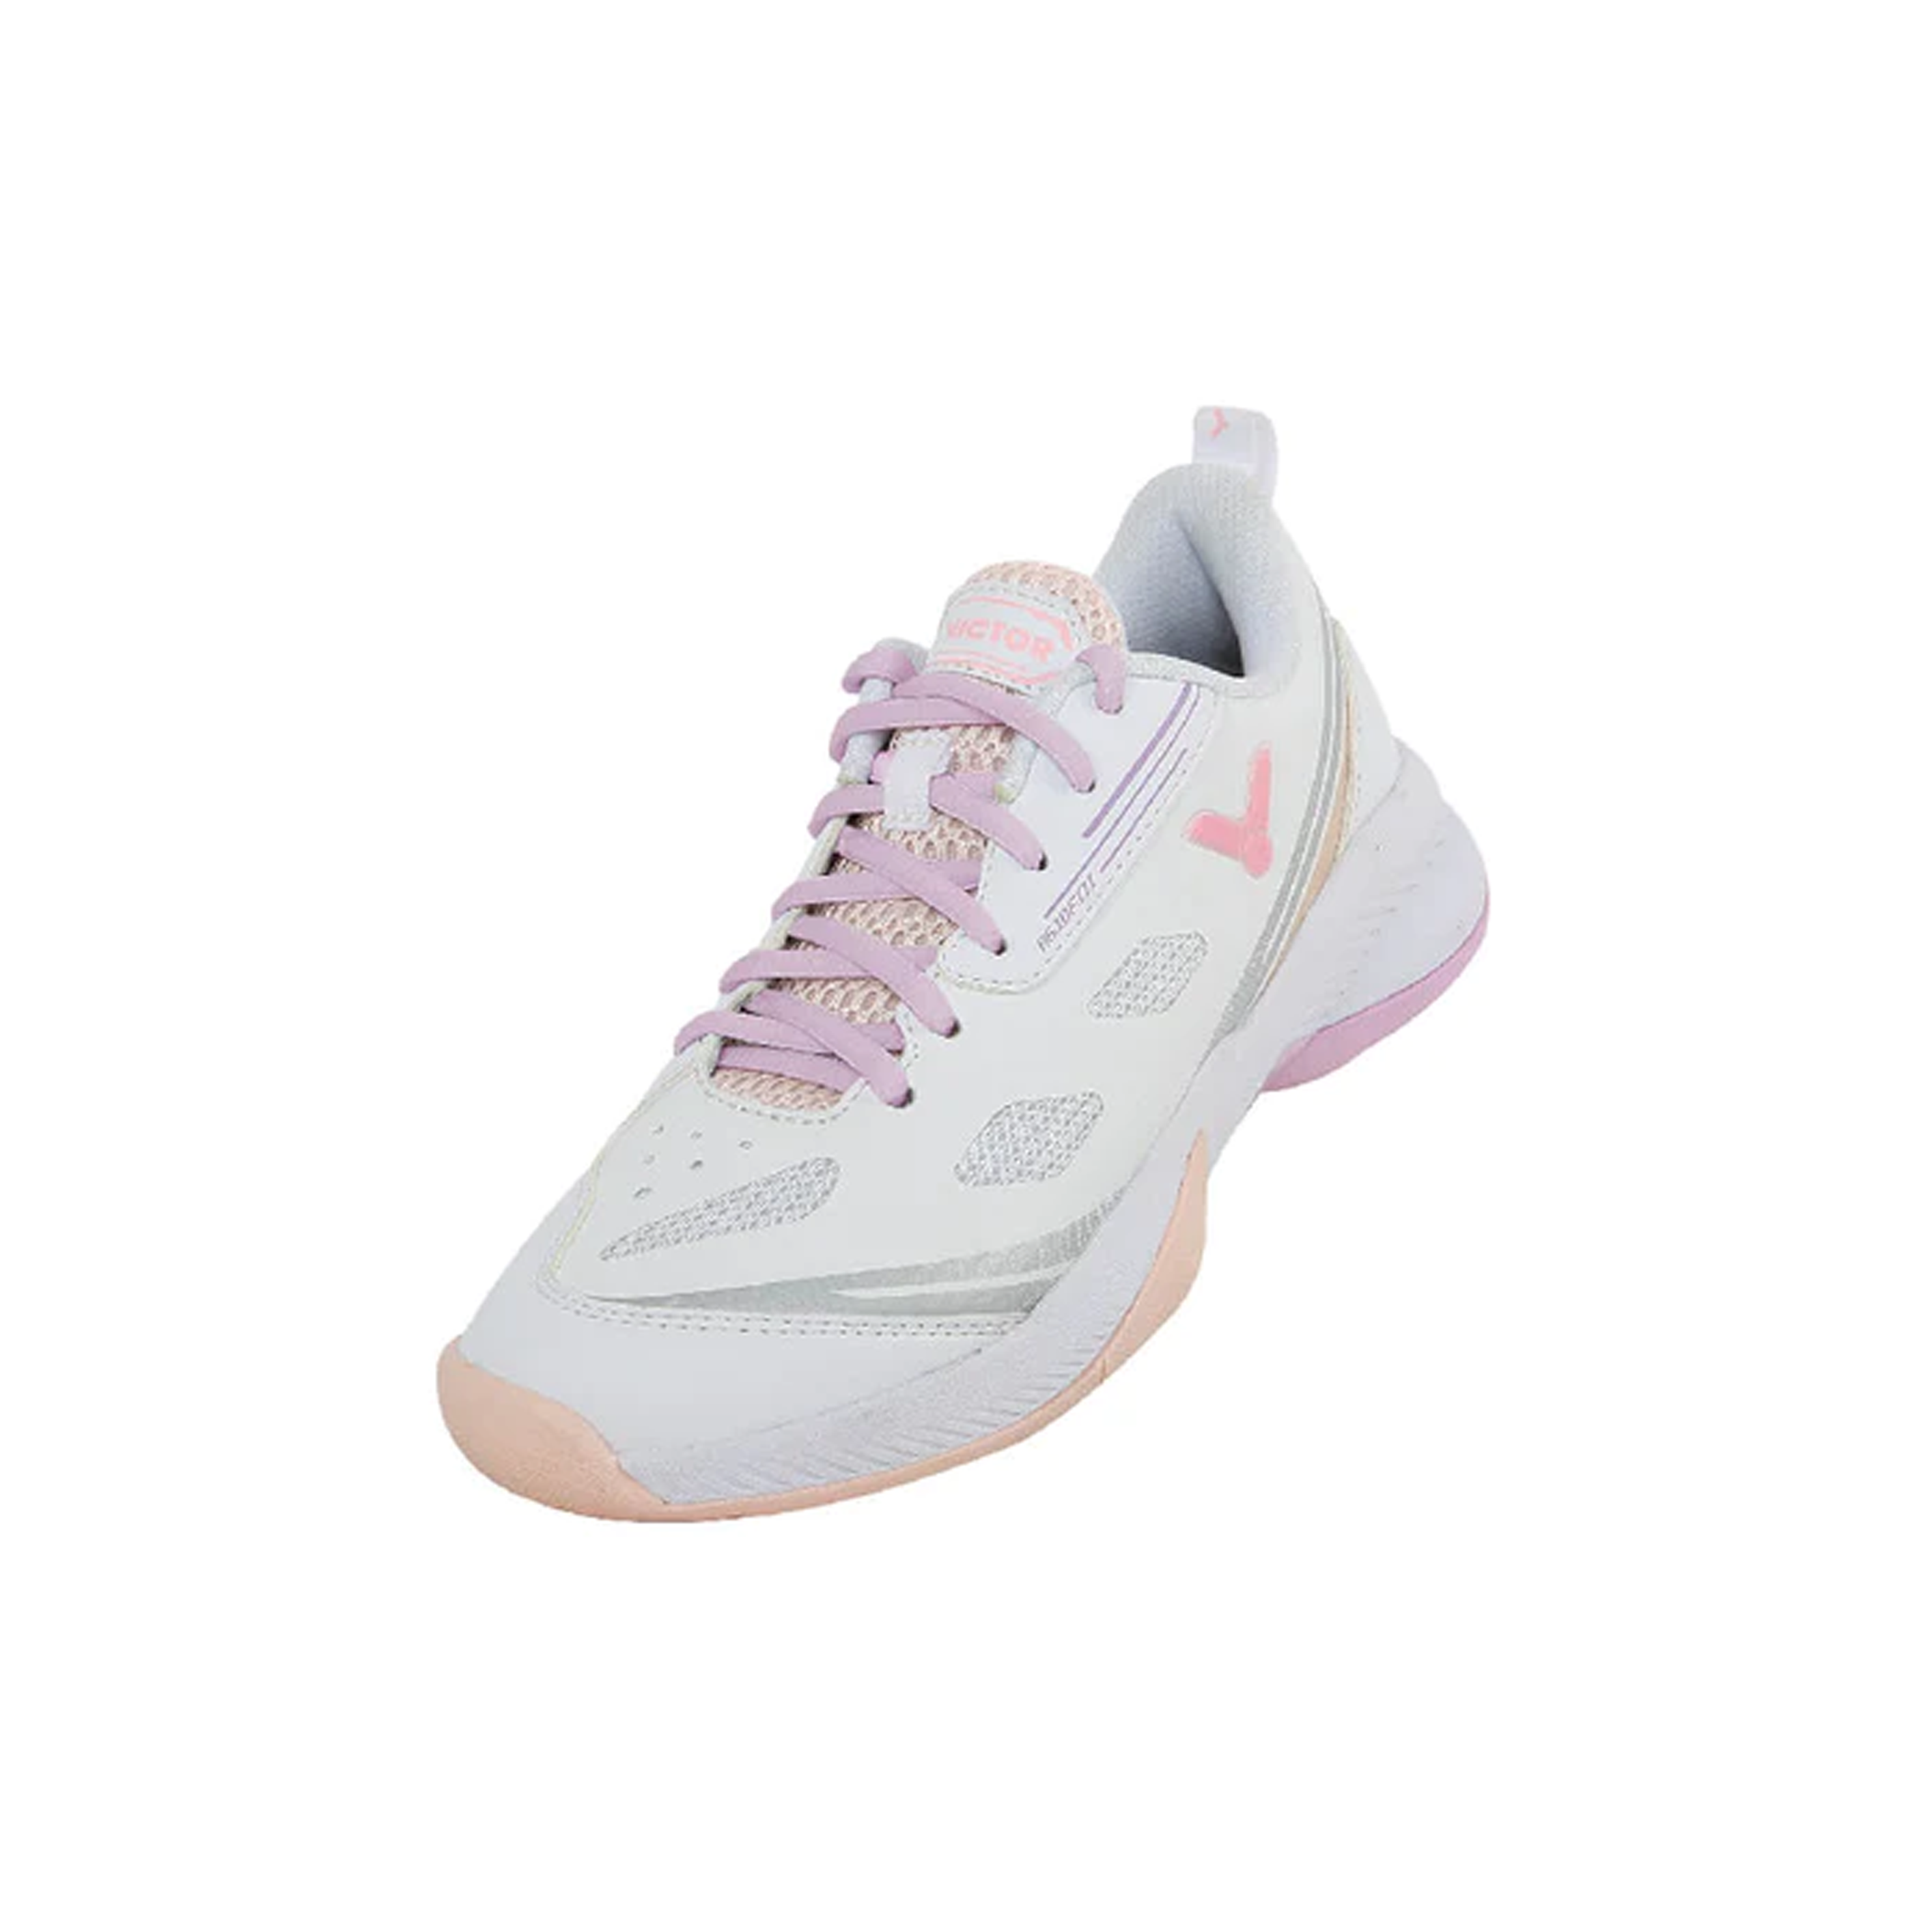 A610FIII-A Professional Badminton Shoes For Women